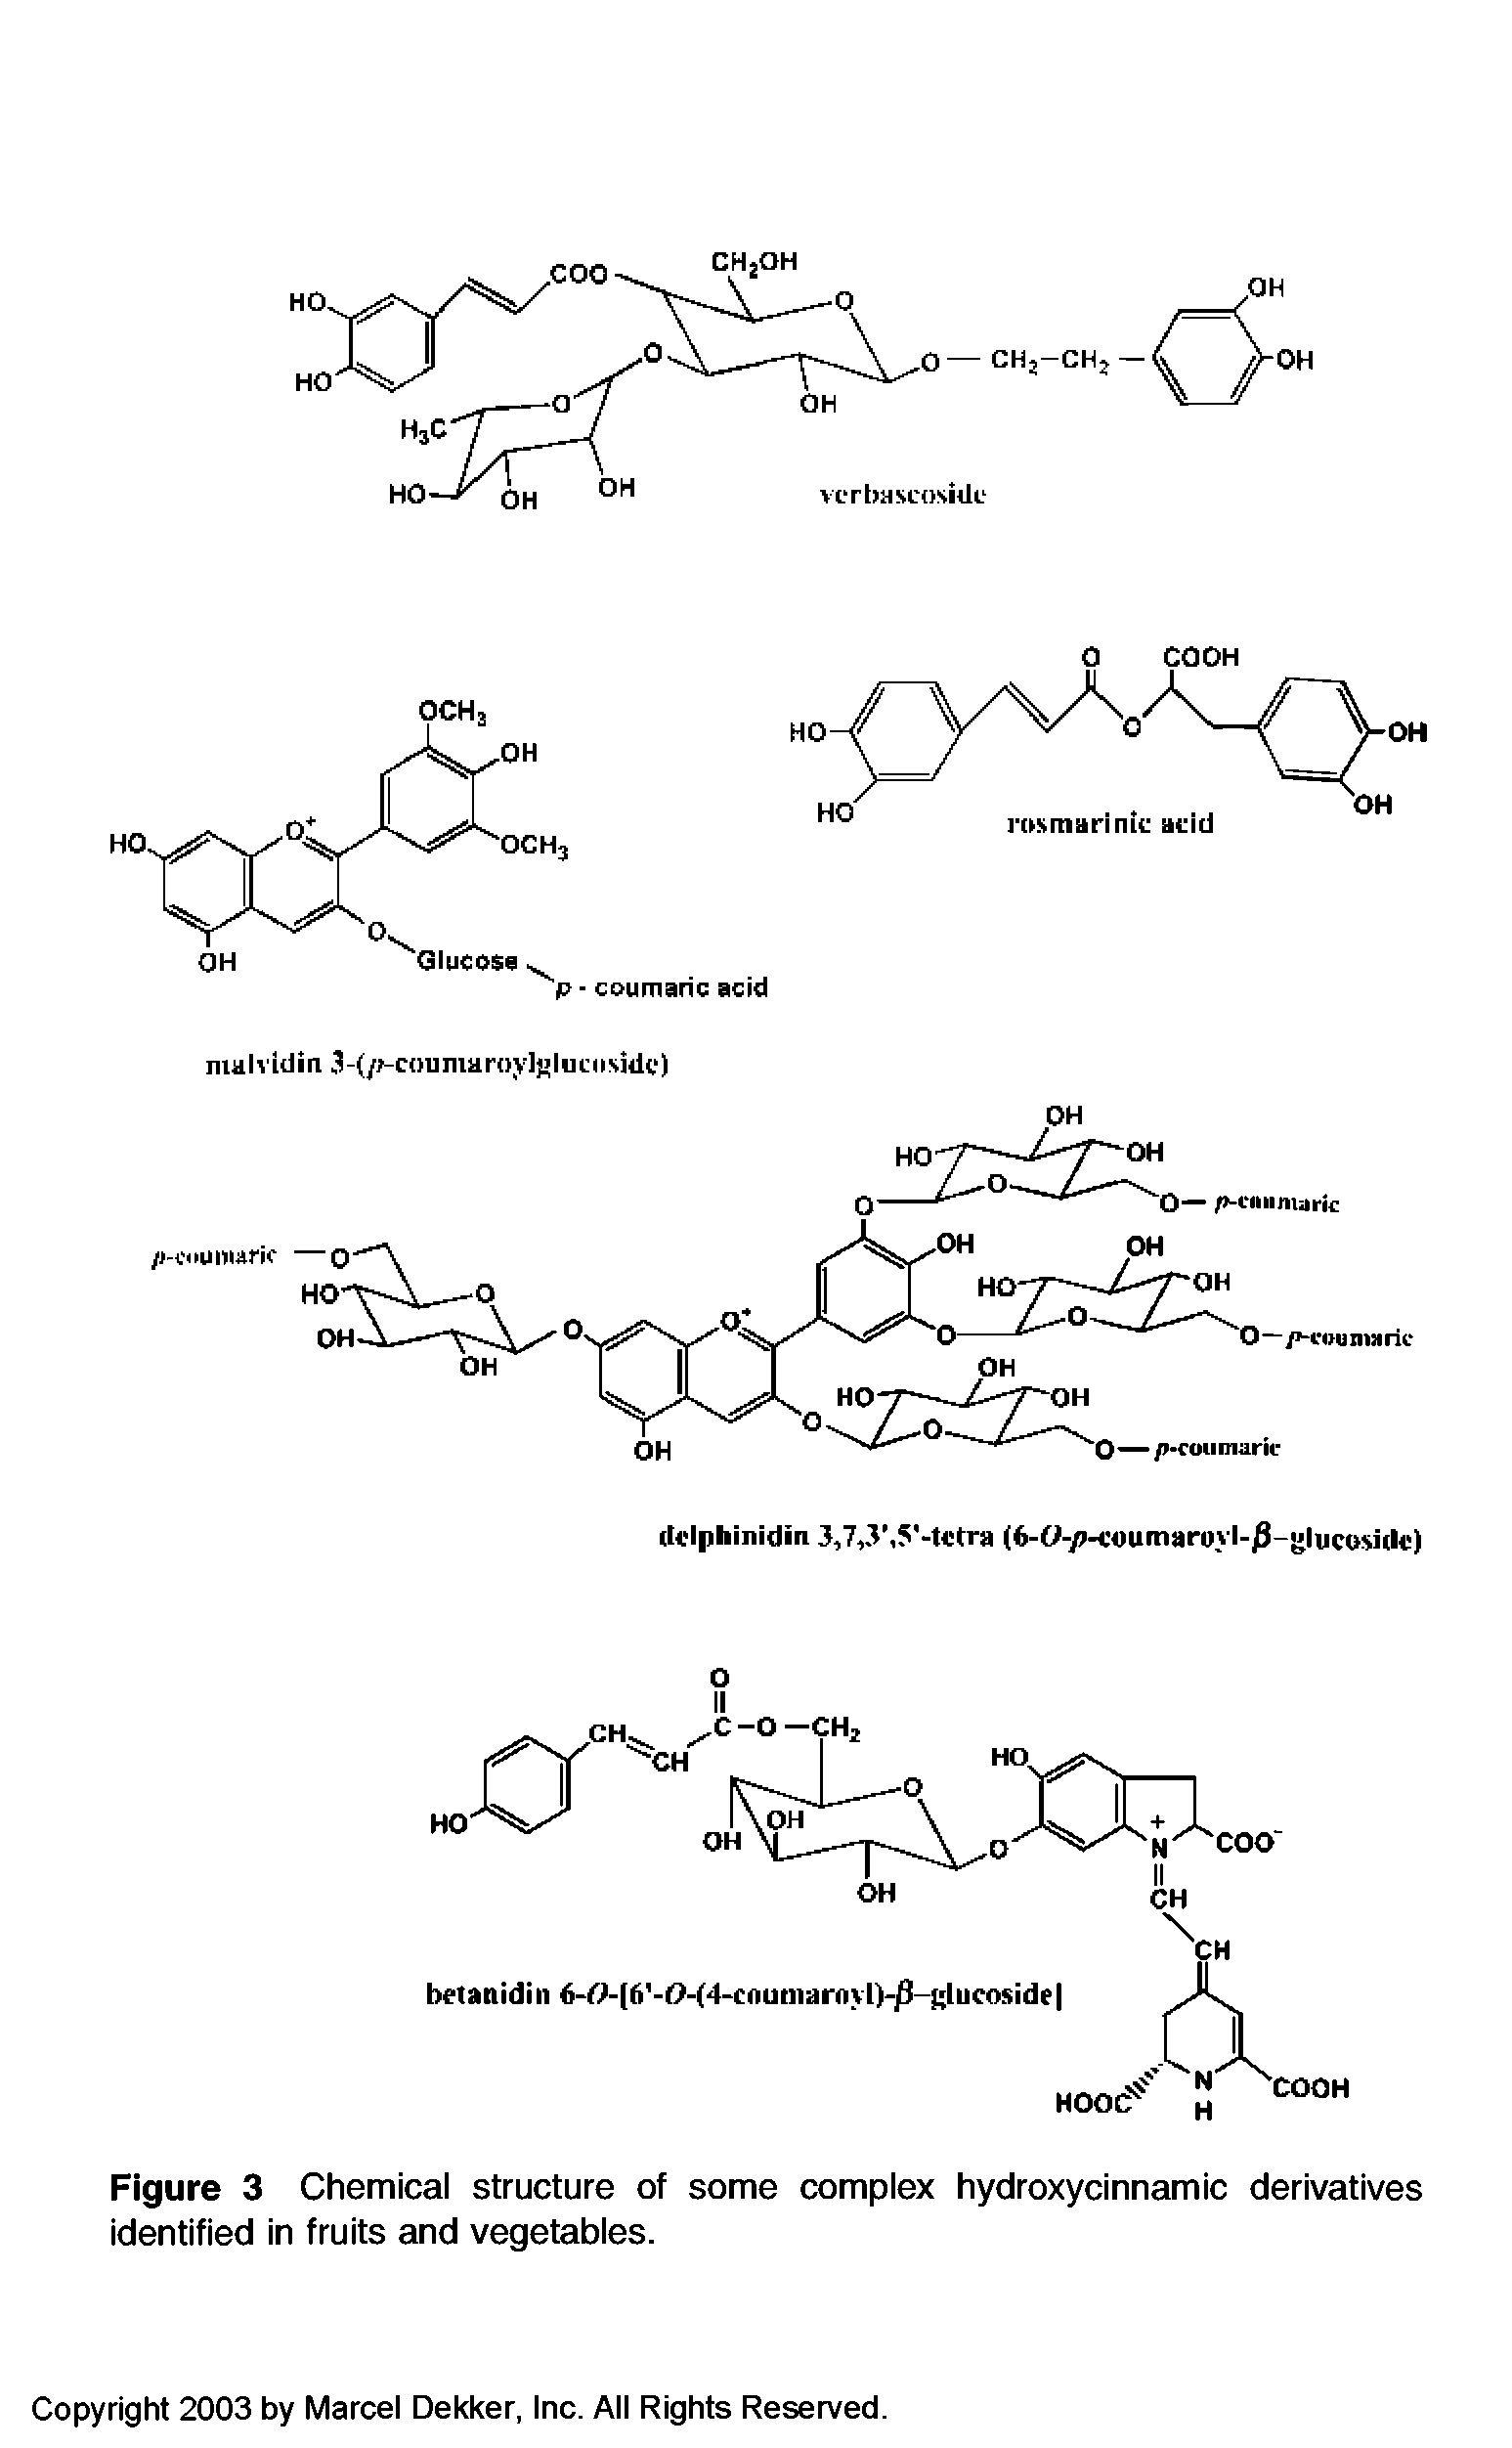 Figure 3 Chemical structure of some complex hydroxycinnamic derivatives identified in fruits and vegetables.